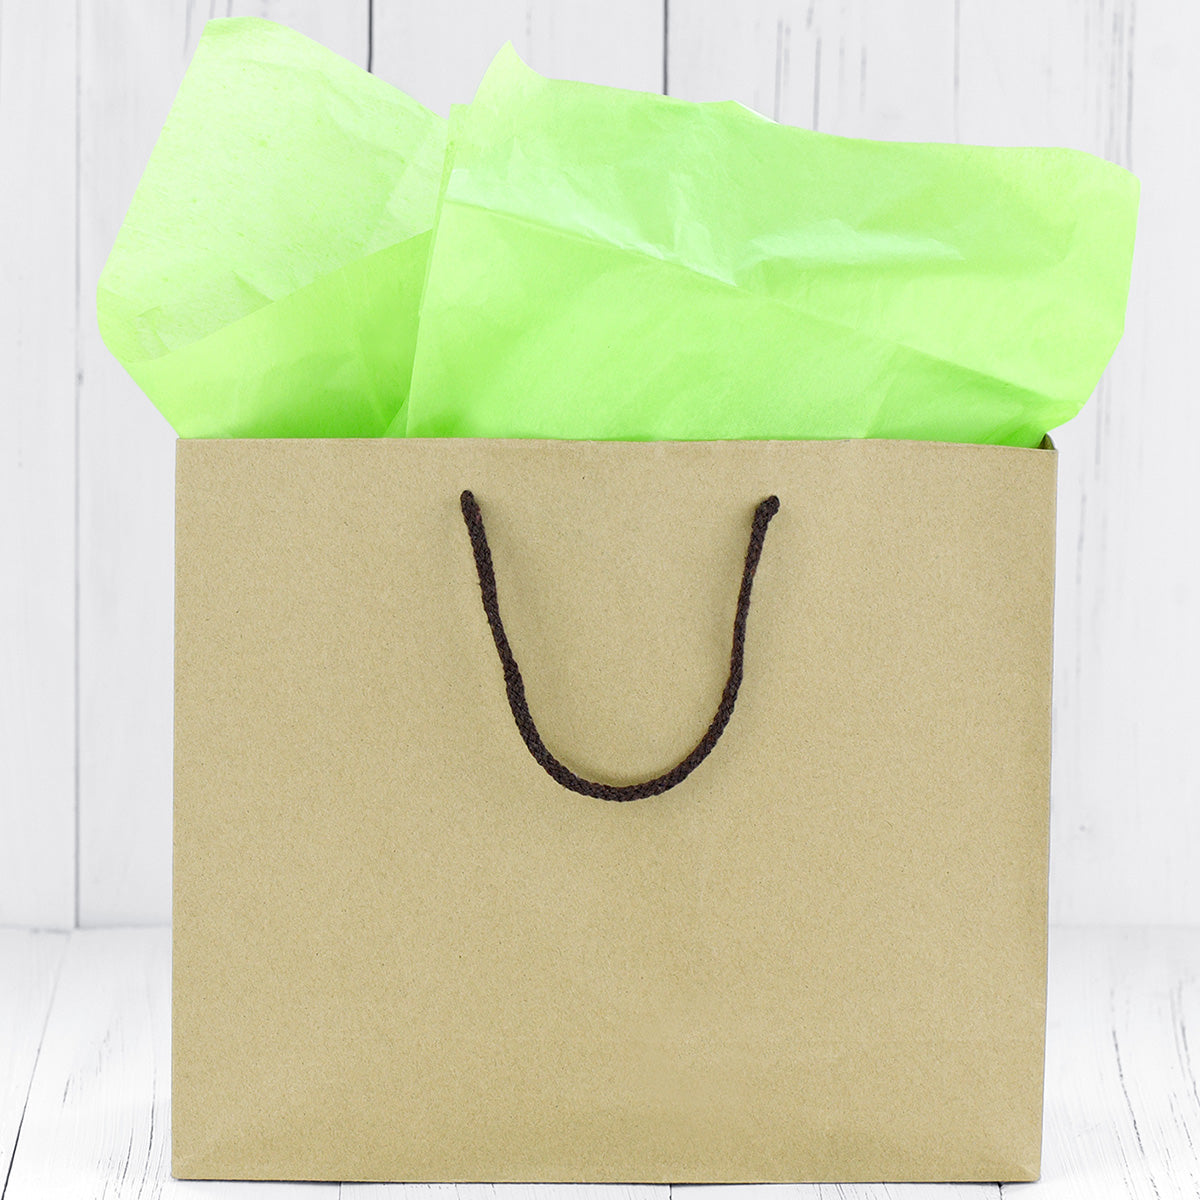 50 Sheets Green Yellow Wrapping Tissue Paper